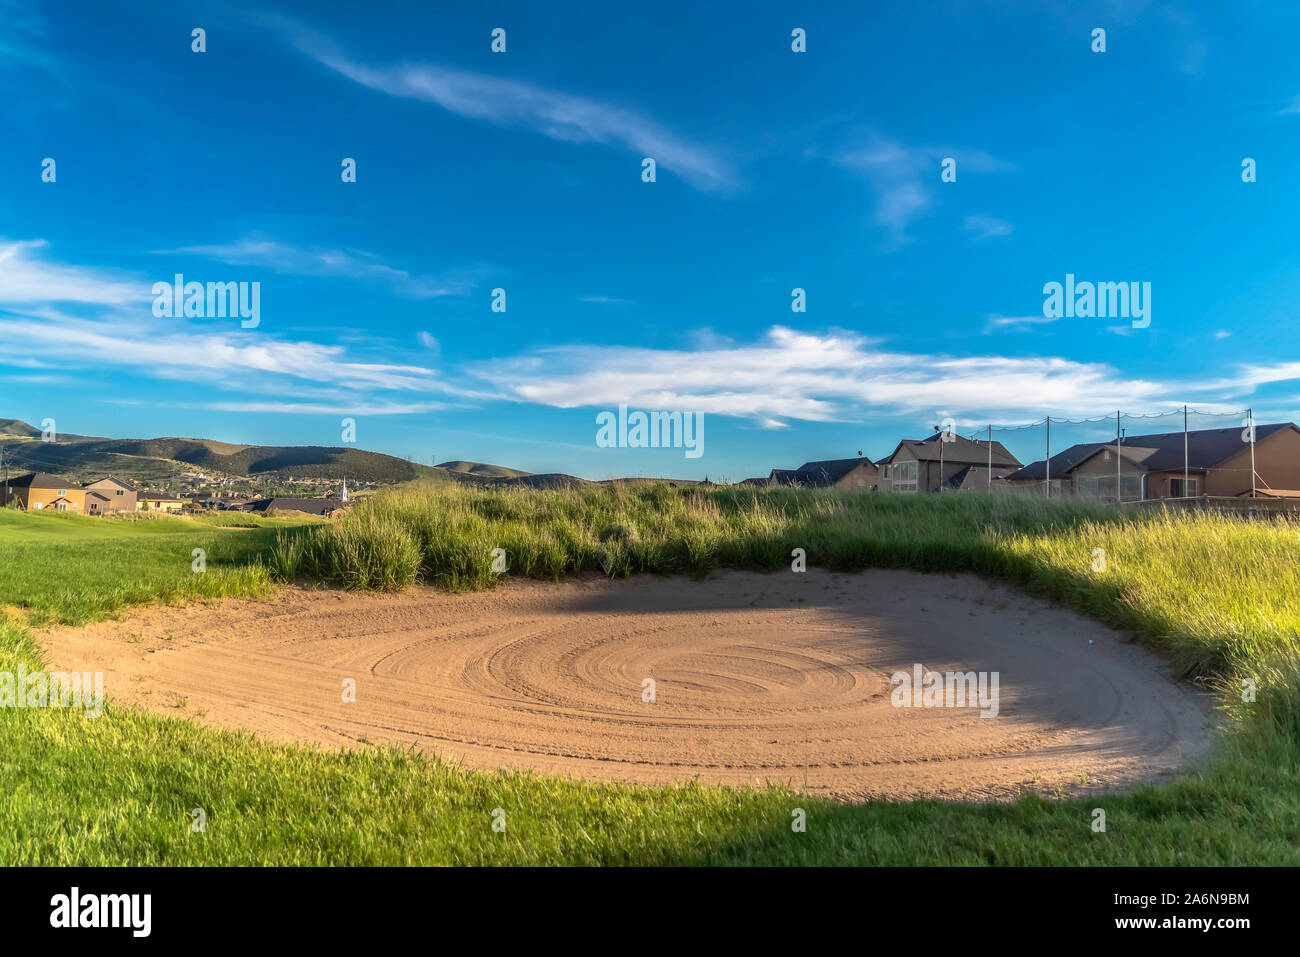 Close up of a sand trap or bunker surrounded by grasses at a golf course Stock Photo